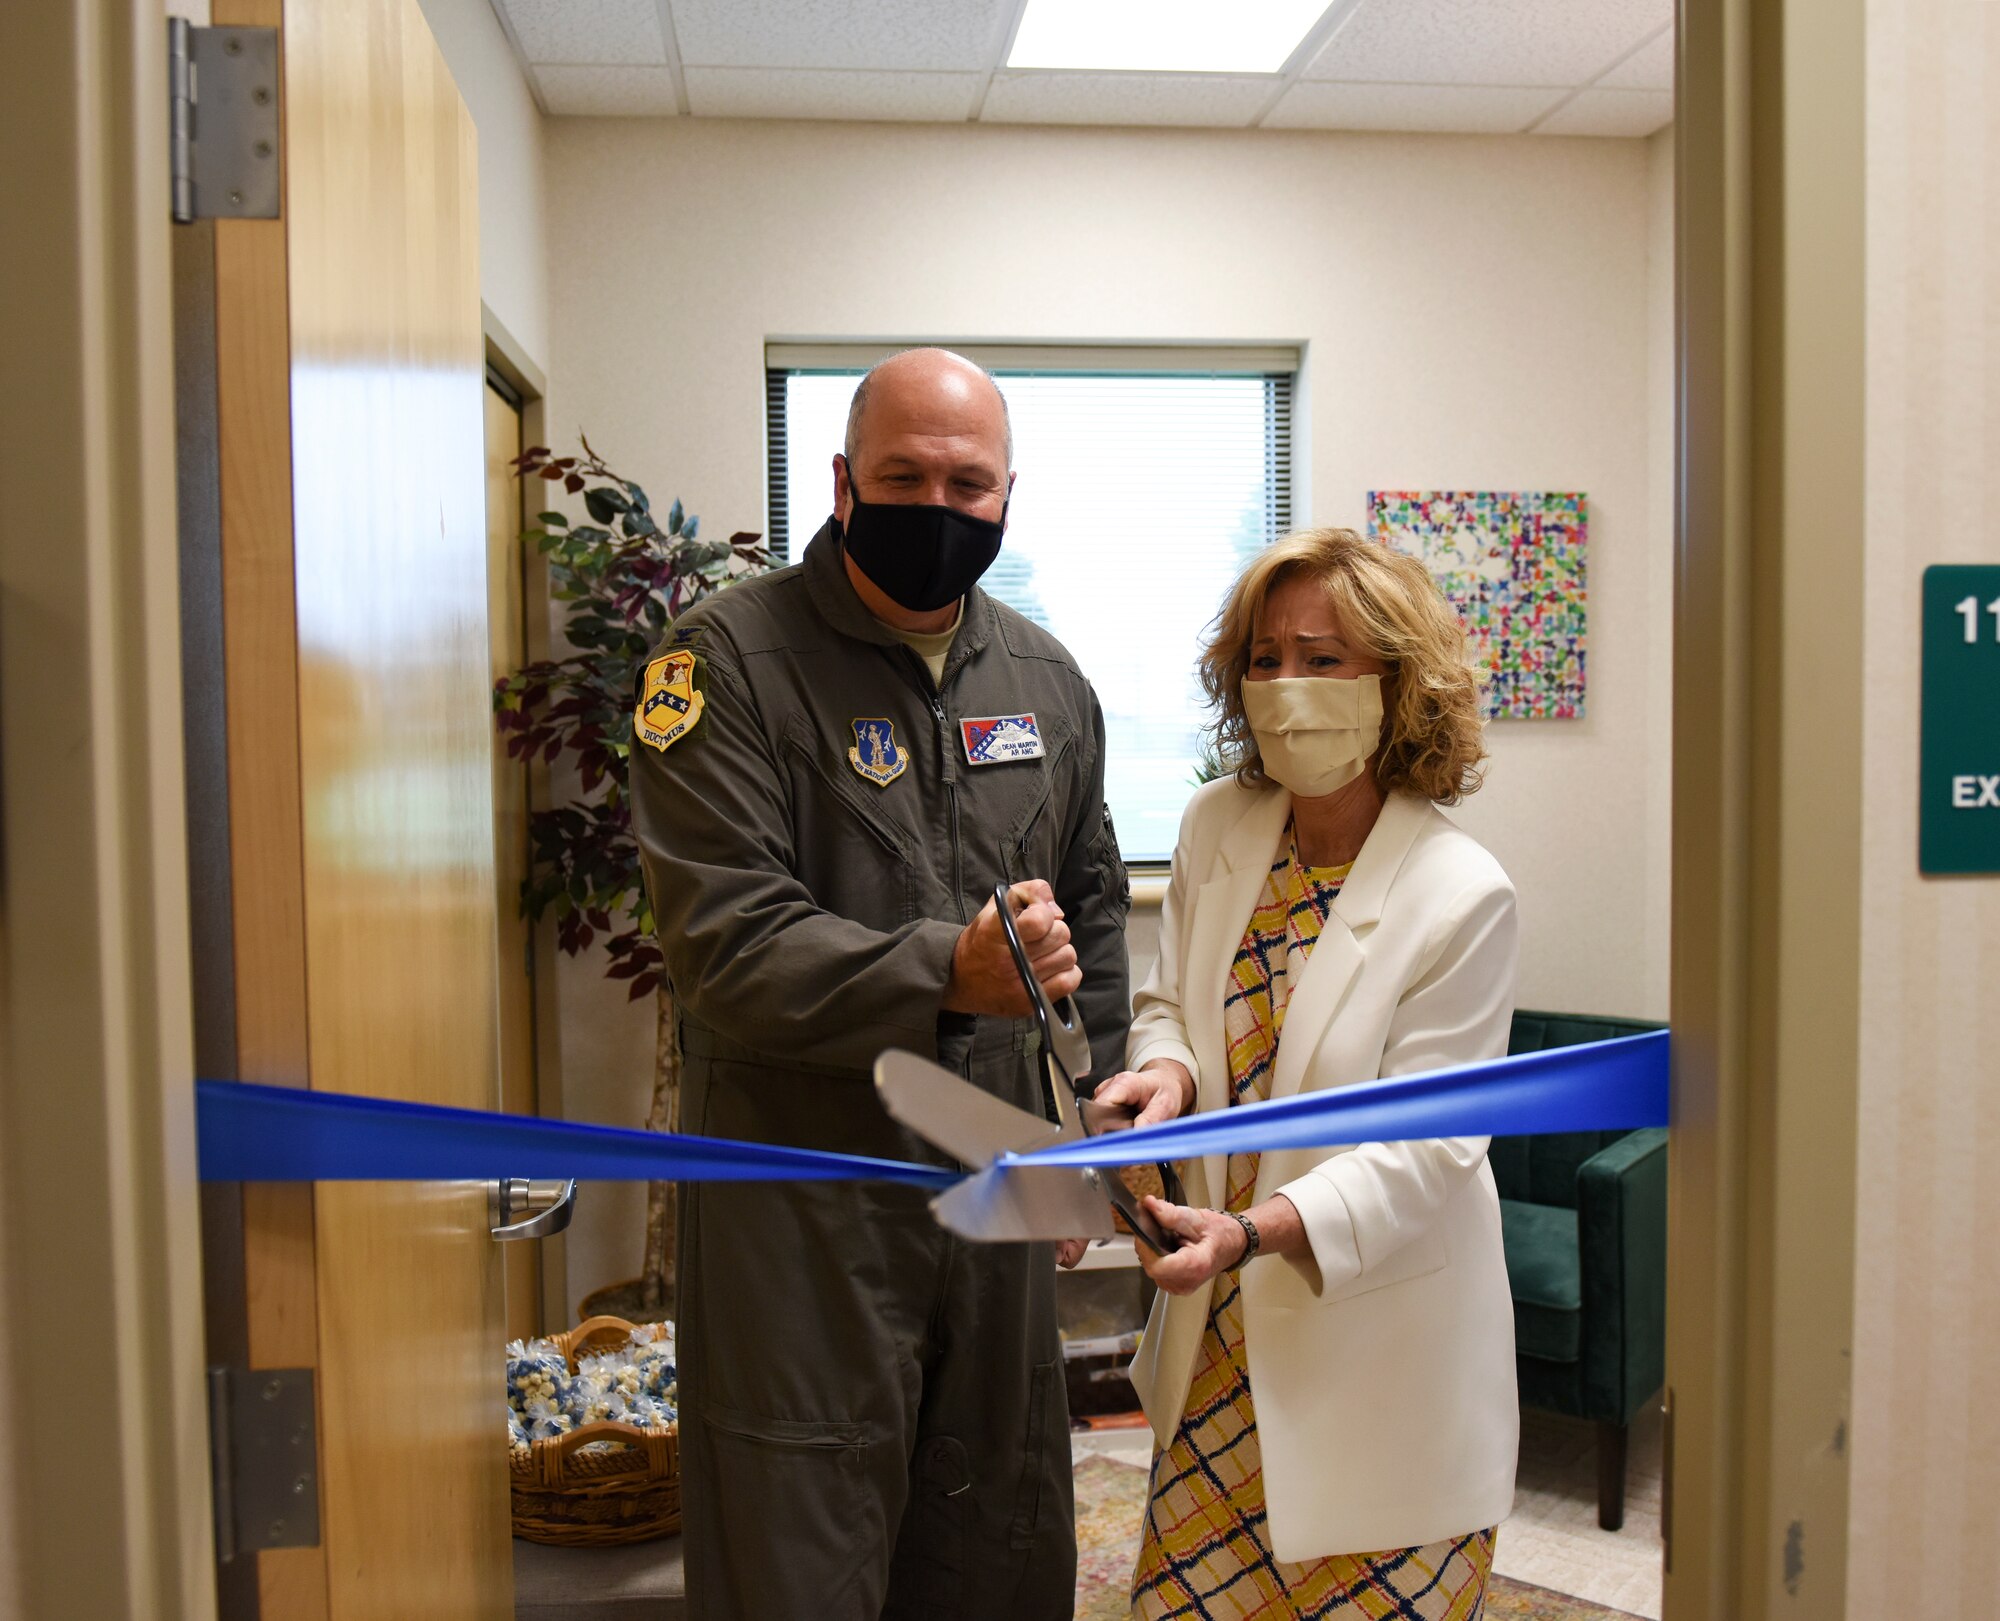 Nursing station grand opening, 189th Airlift Wing, 189th Medical Group